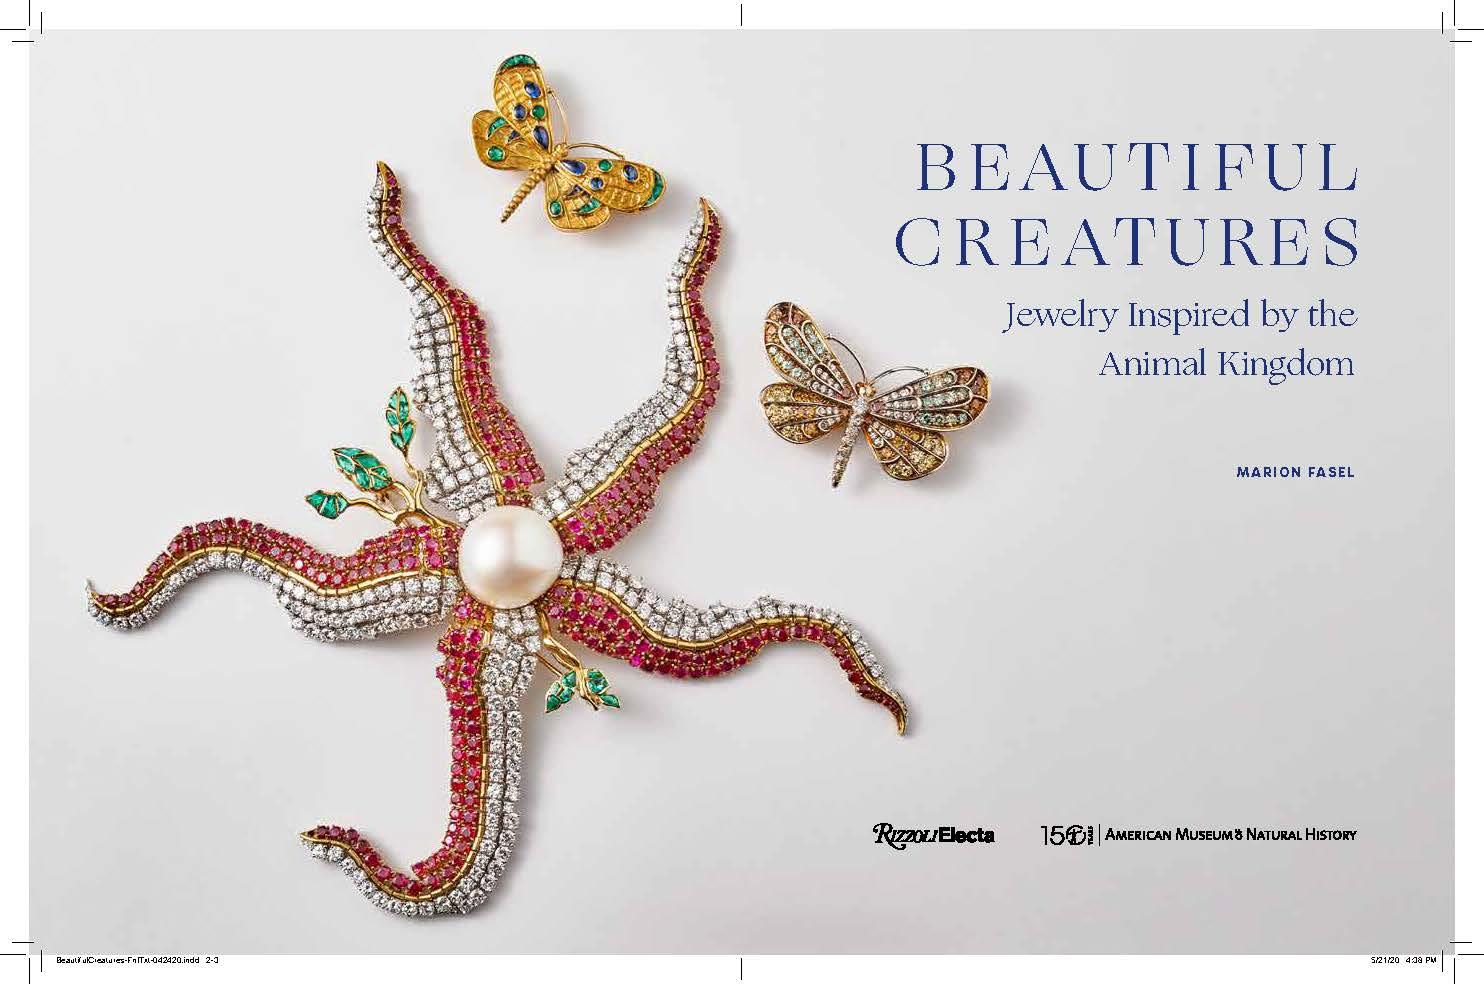 Written by Marion Fasel

Creatures from the animal kingdom represented in exquisite jewelry by renowned masters Cartier, Bulgari, Tiffany & Co., JAR, Belperron, David Webb, Schlumberger, Boucheron, and many other brilliant jewelers.

Many of the